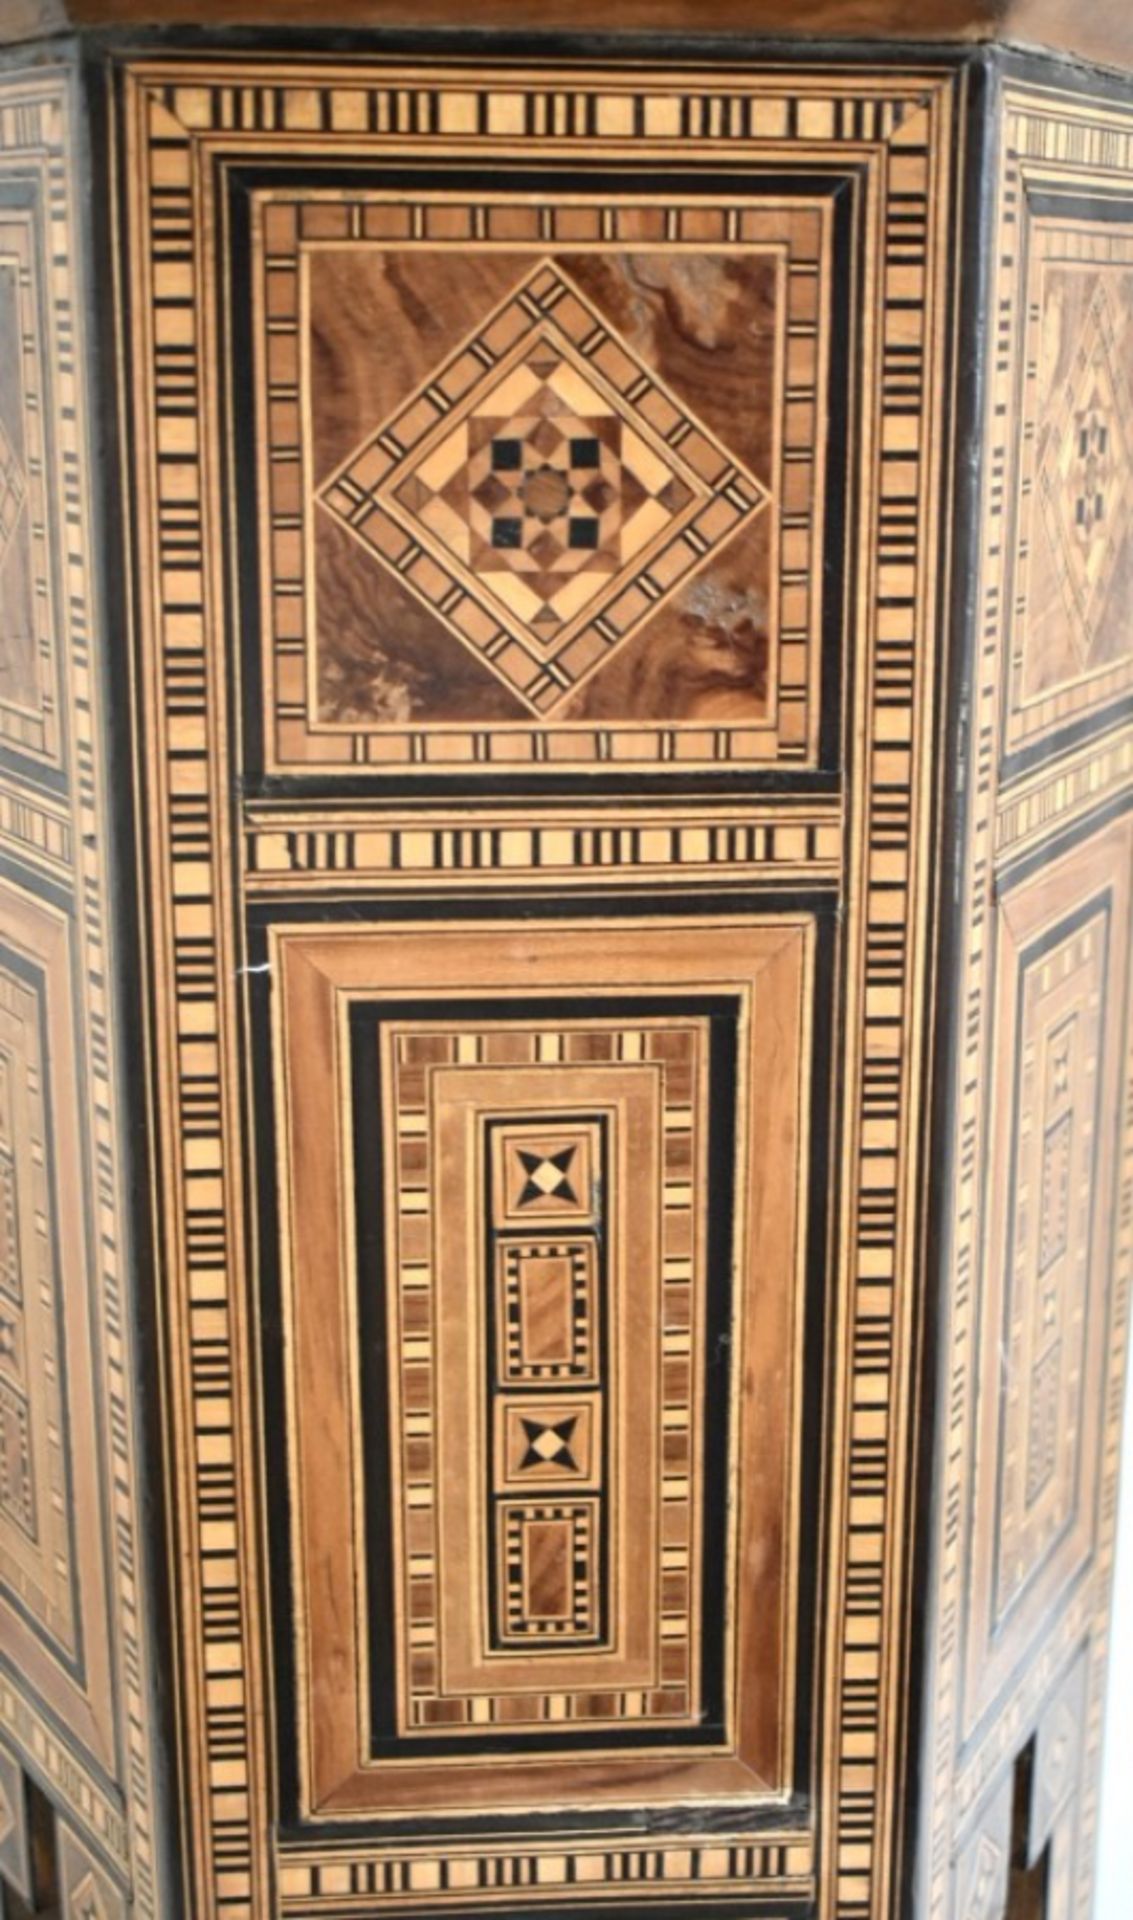 Moroccan or Syrian pedestal table - Image 4 of 7